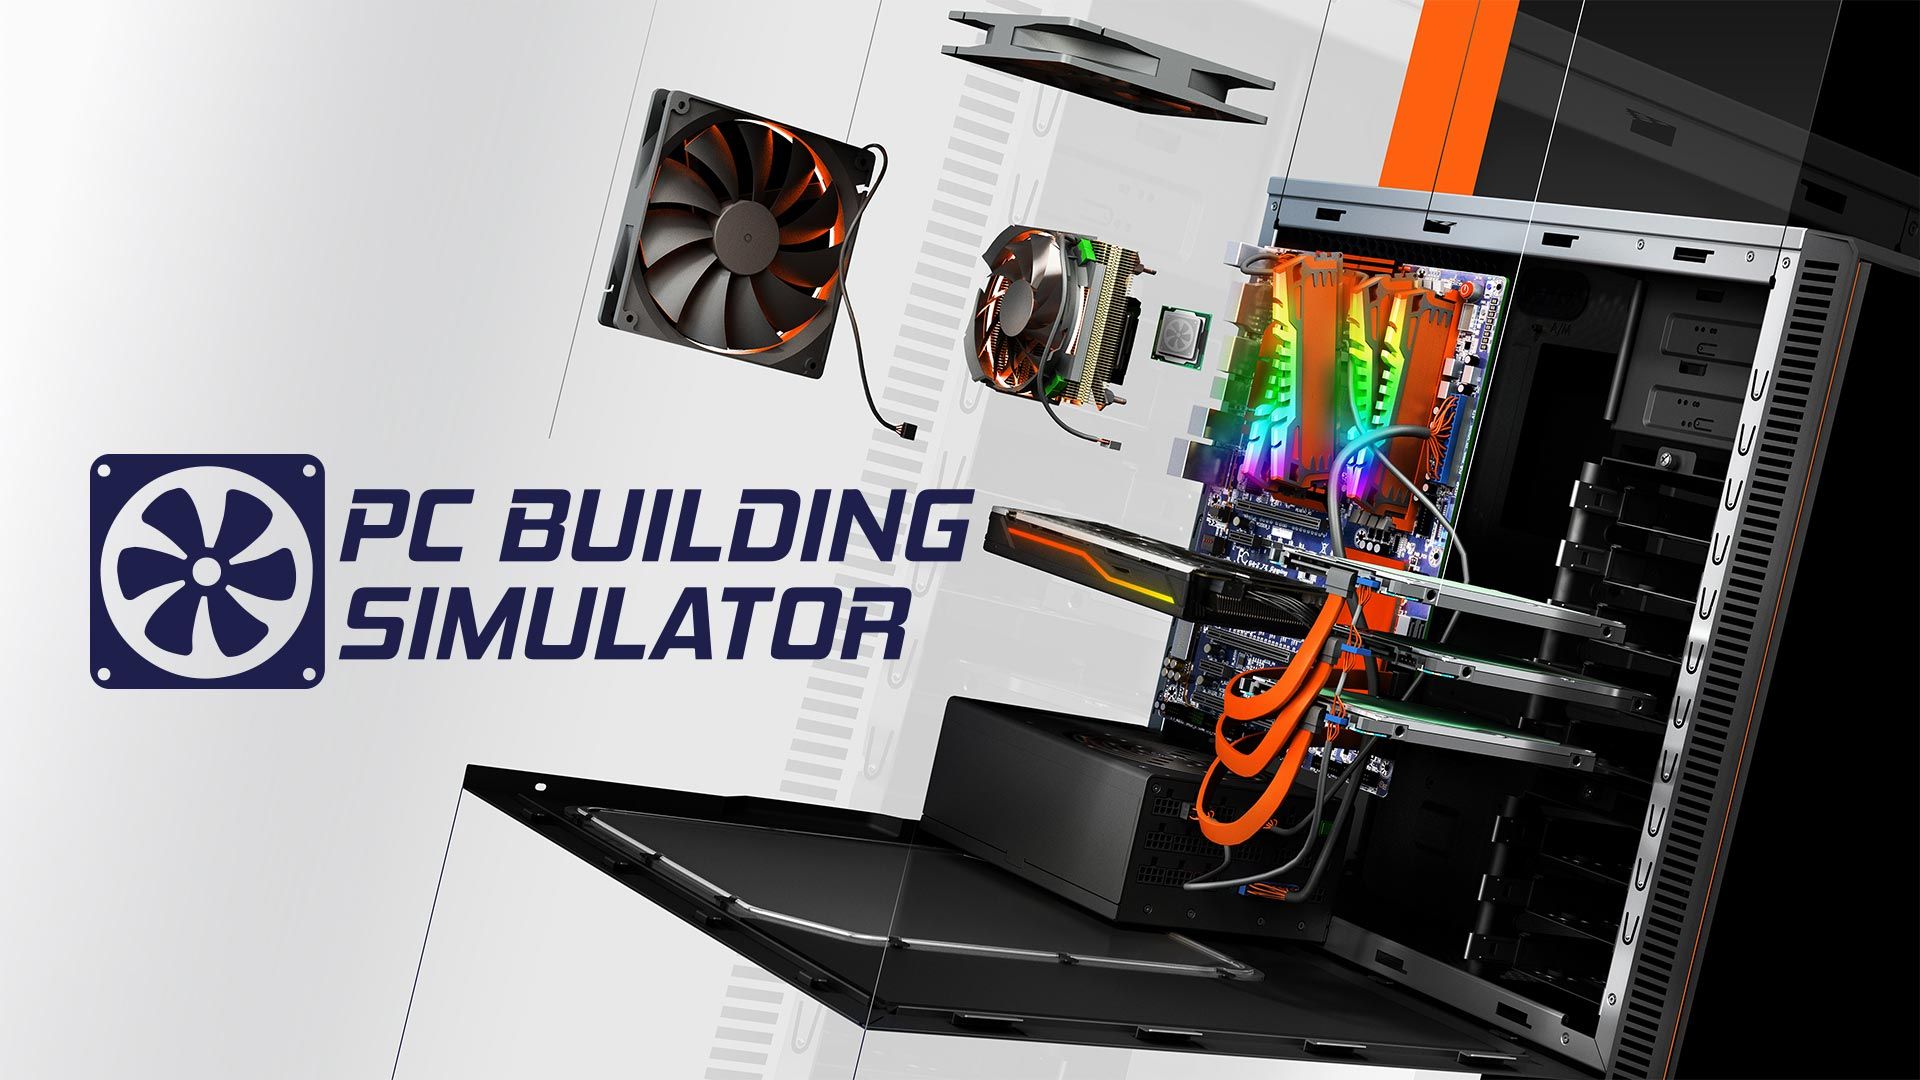 PC Building Simulator for Nintendo Switch Game Details